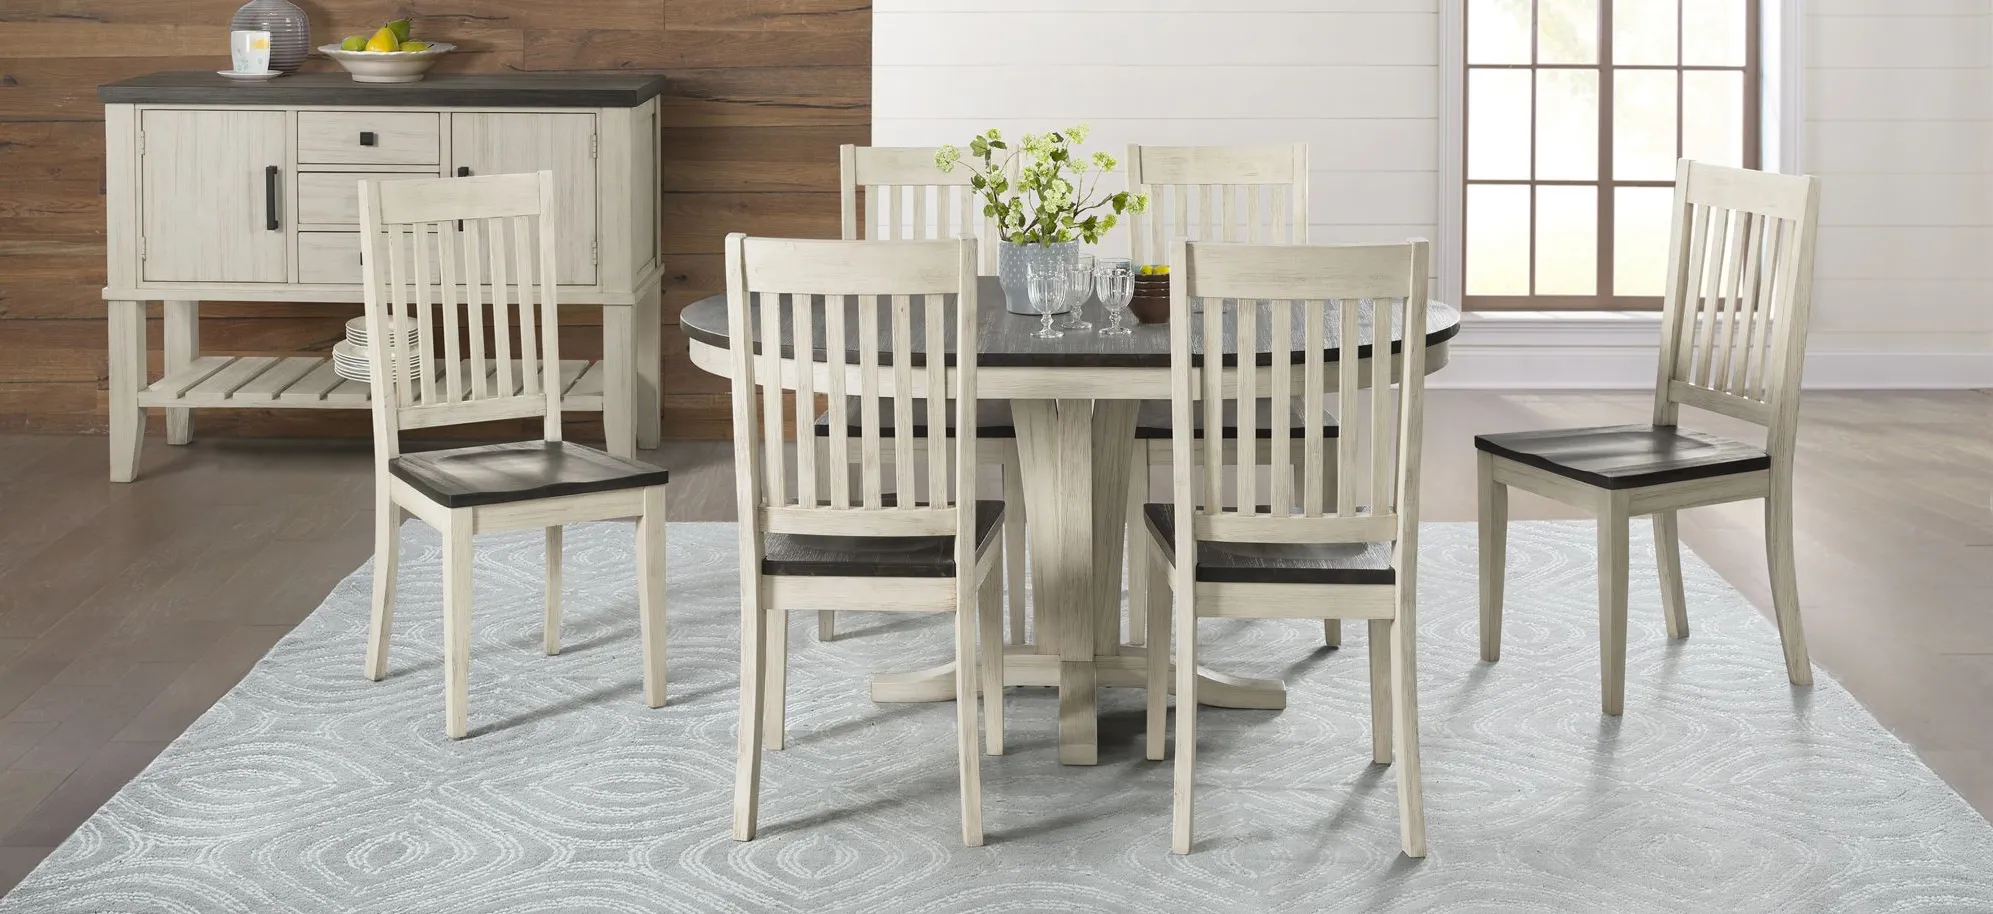 Huron 7-pc. Round Slatback Dining Set in Chalk-Cocoa Bean by A-America